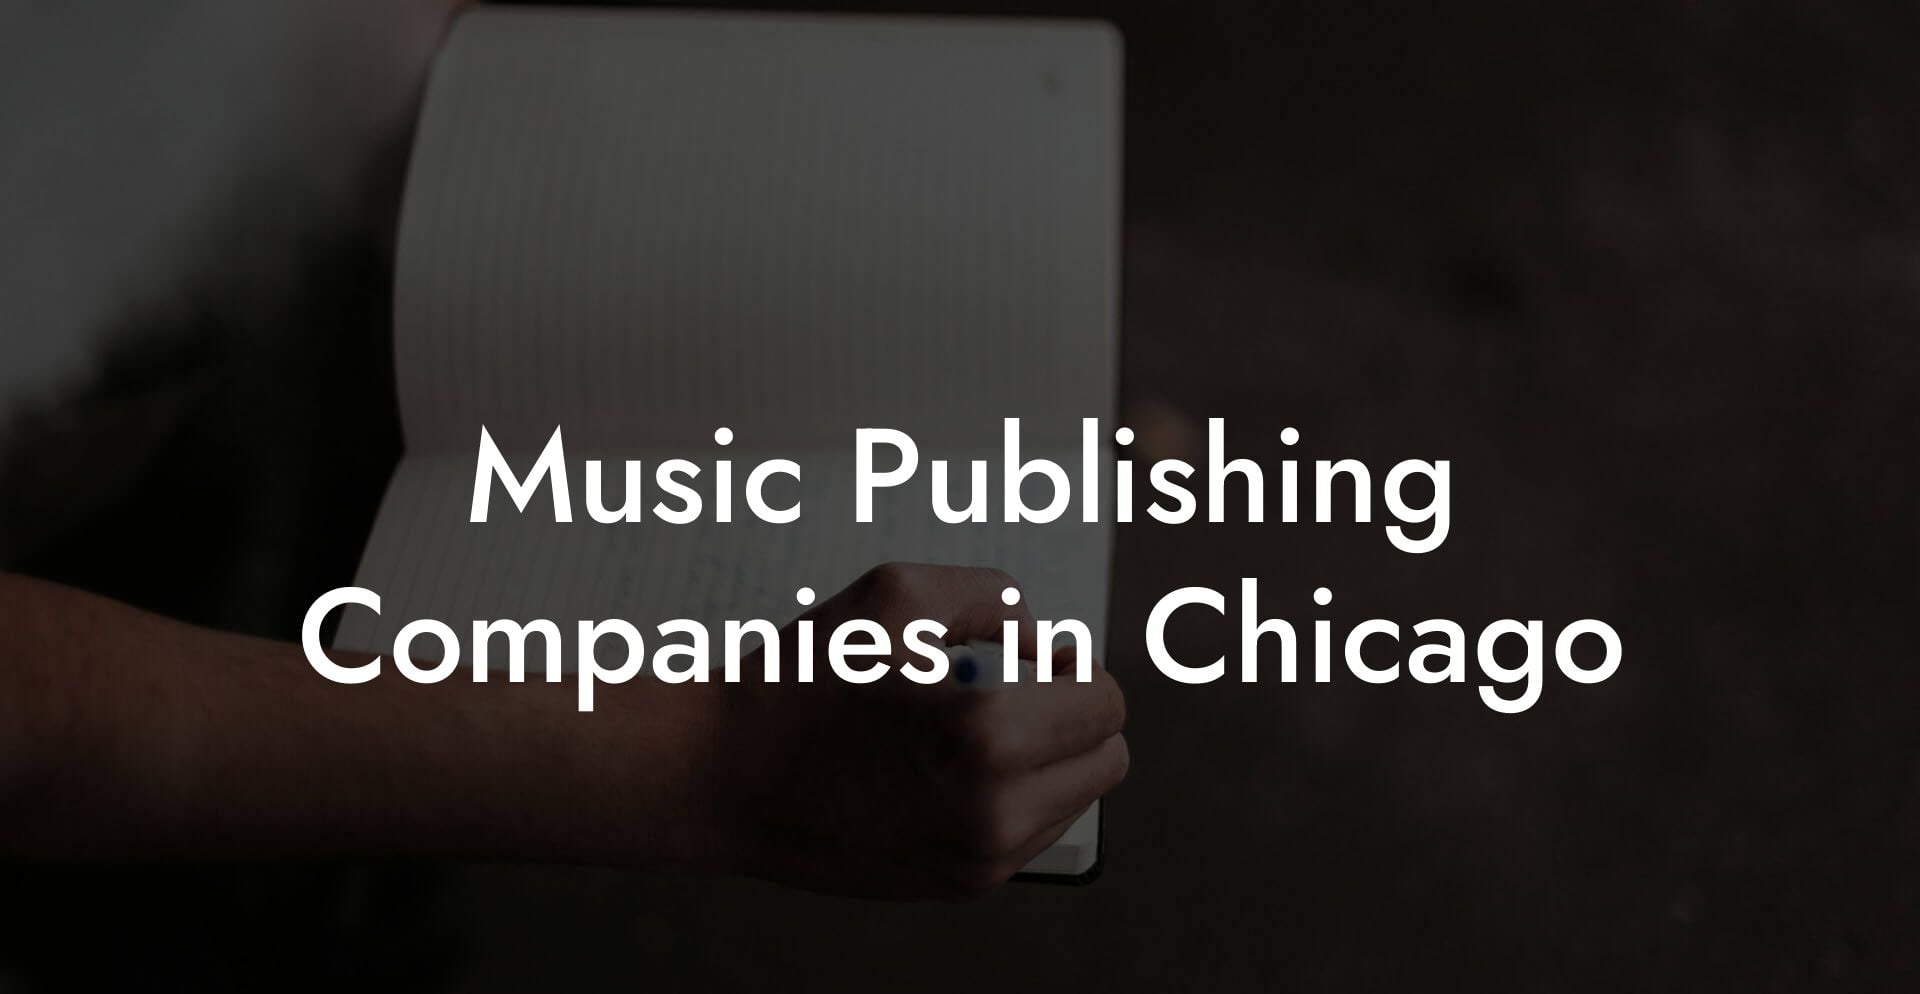 Music Publishing Companies in Chicago